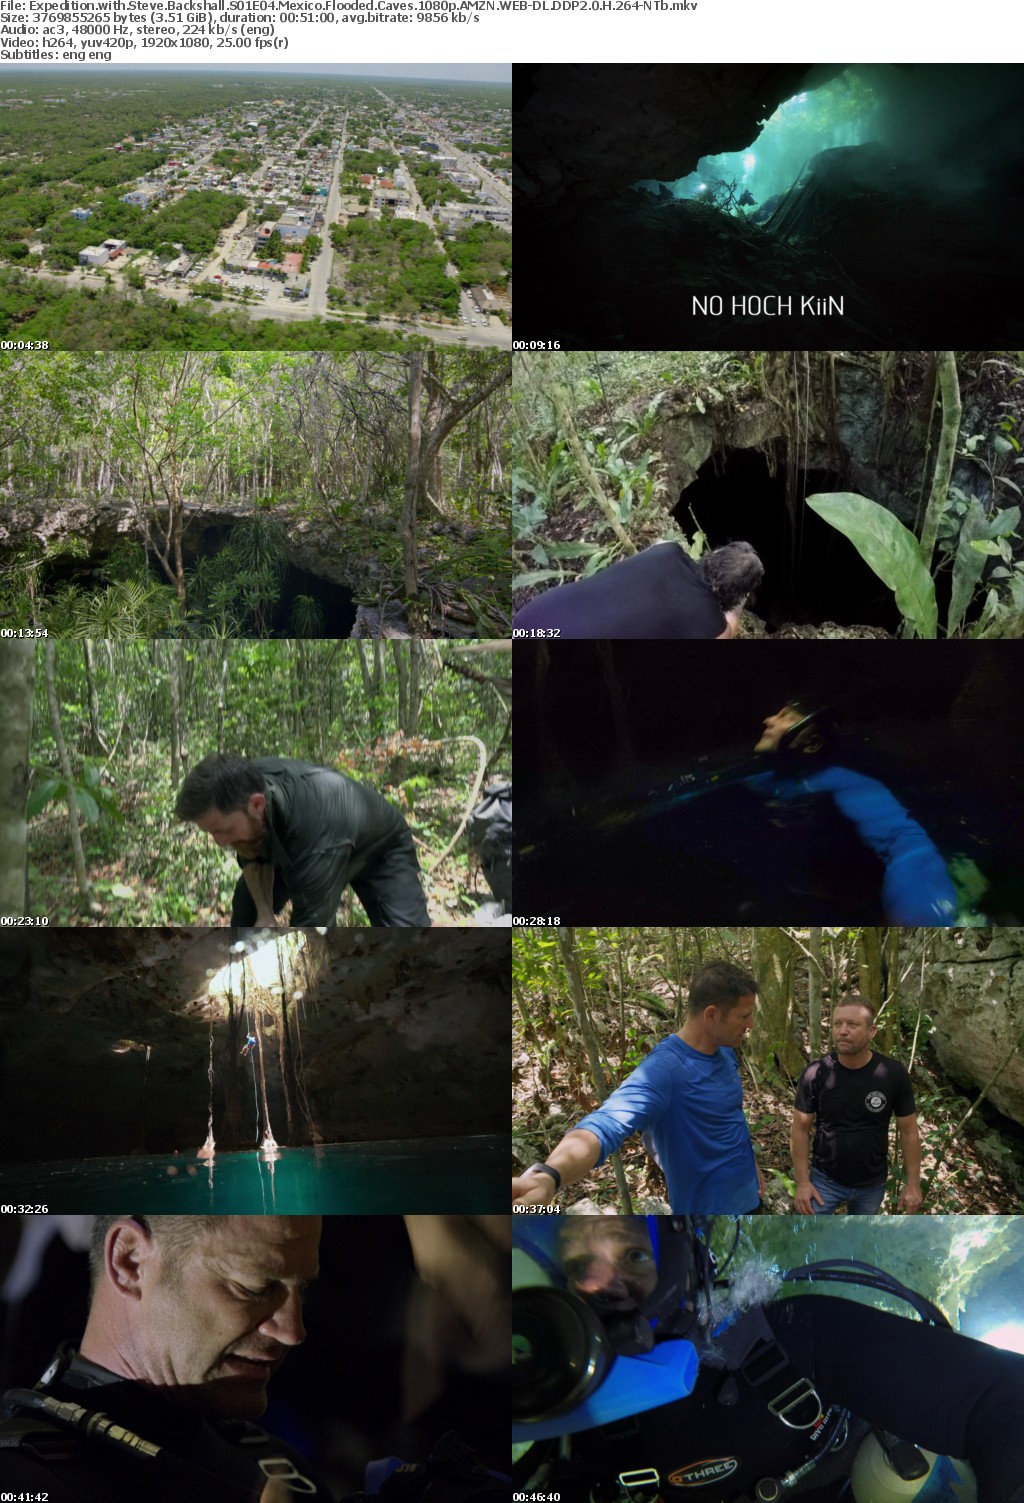 Expedition with Steve Backshall S01E04 Mexico Flooded Caves 1080p AMZN WEB-DL DDP2 0 H 264-NTb